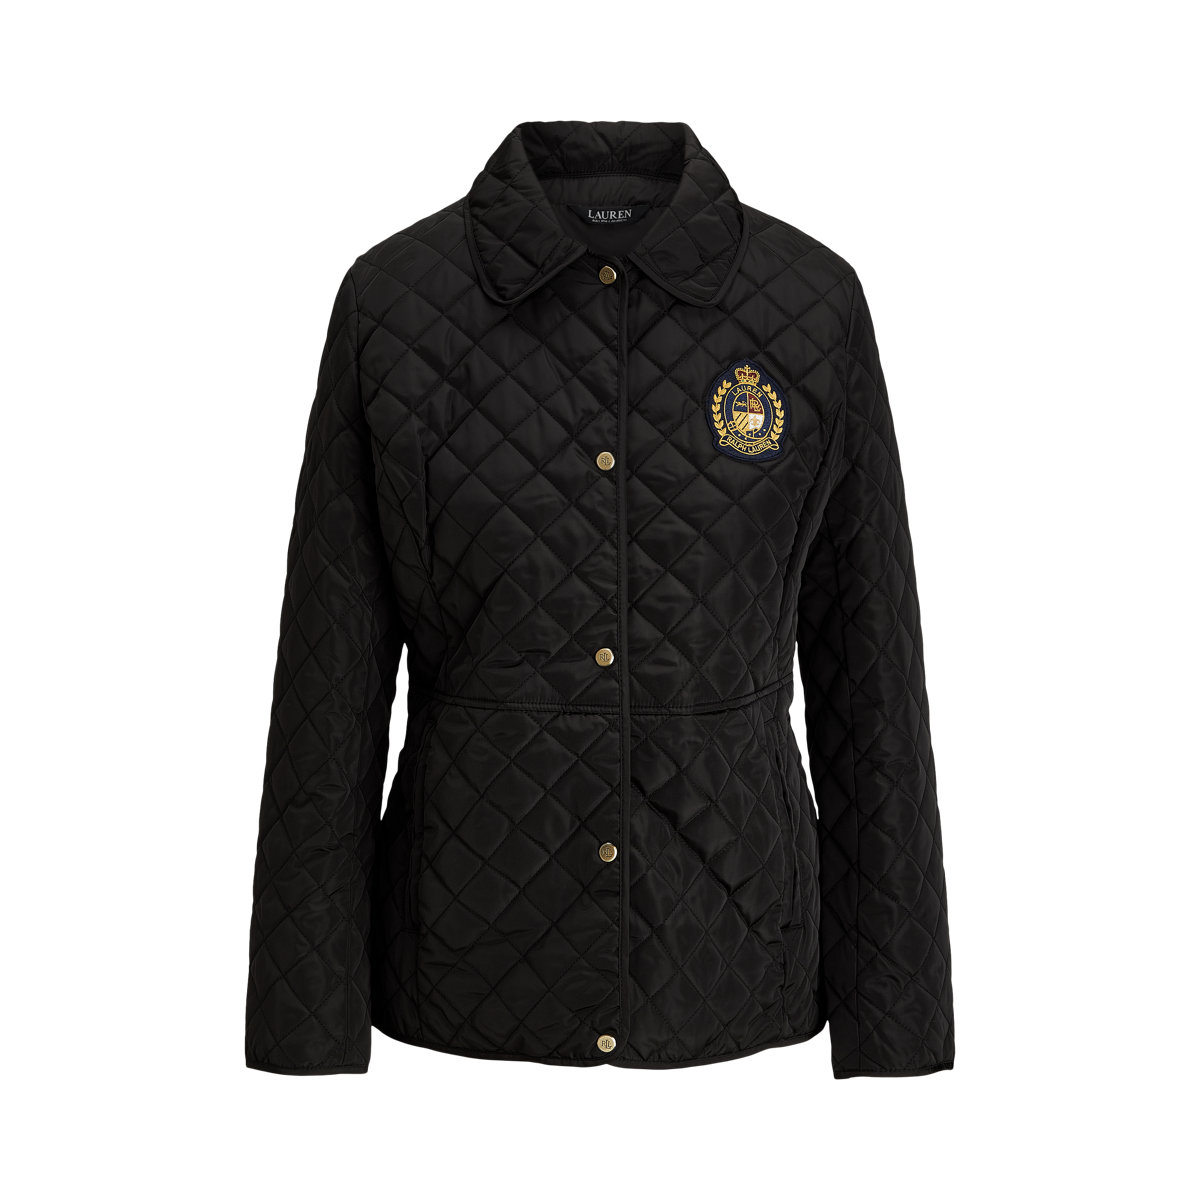 Crest-Patch Diamond-Quilted Jacket